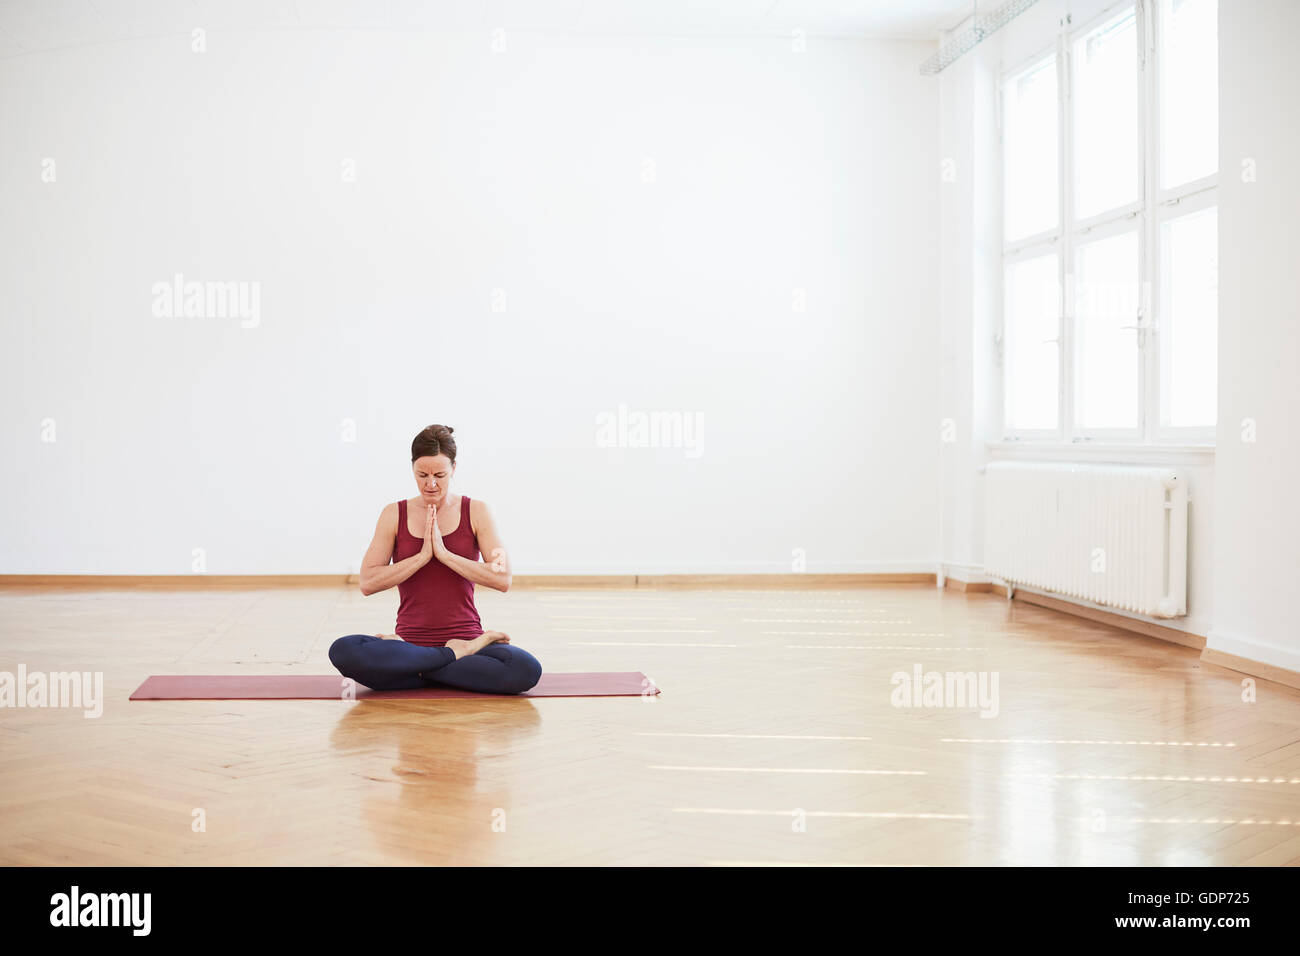 Woman in exercise studio sitting cross legged, hands together meditating Stock Photo